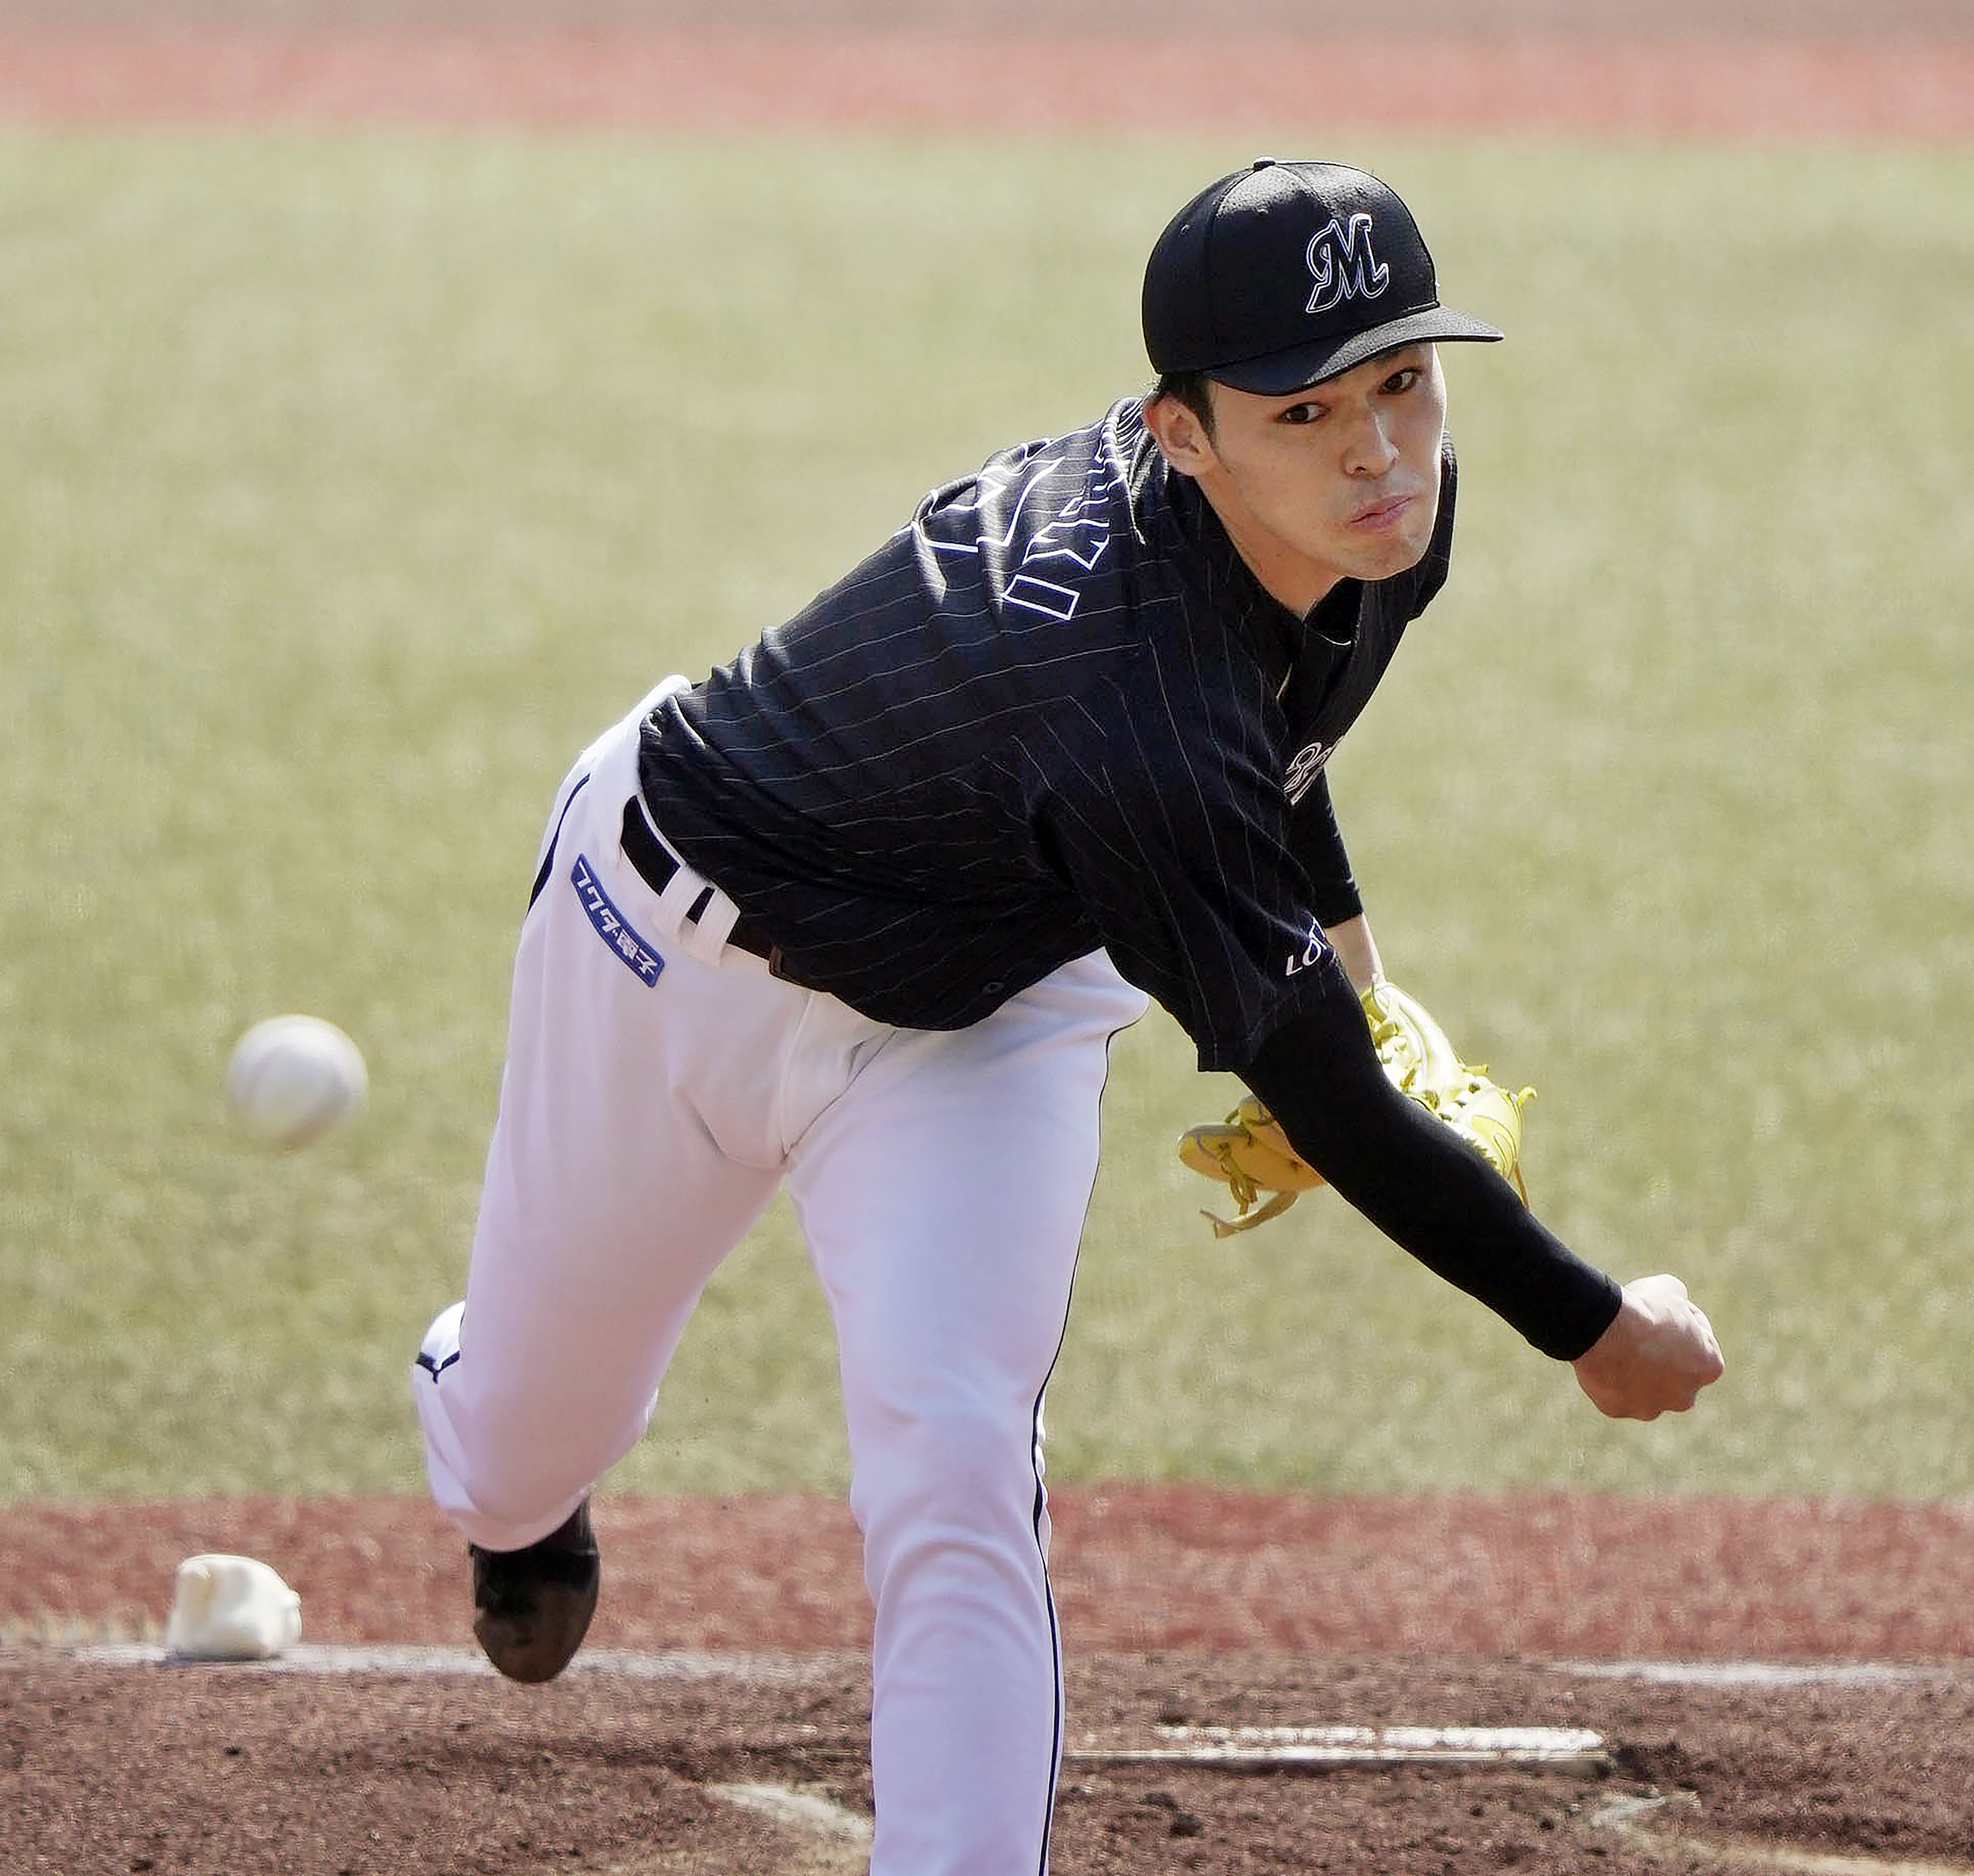 Japanese superstar ace Yankees scouted suffers season-ending injury